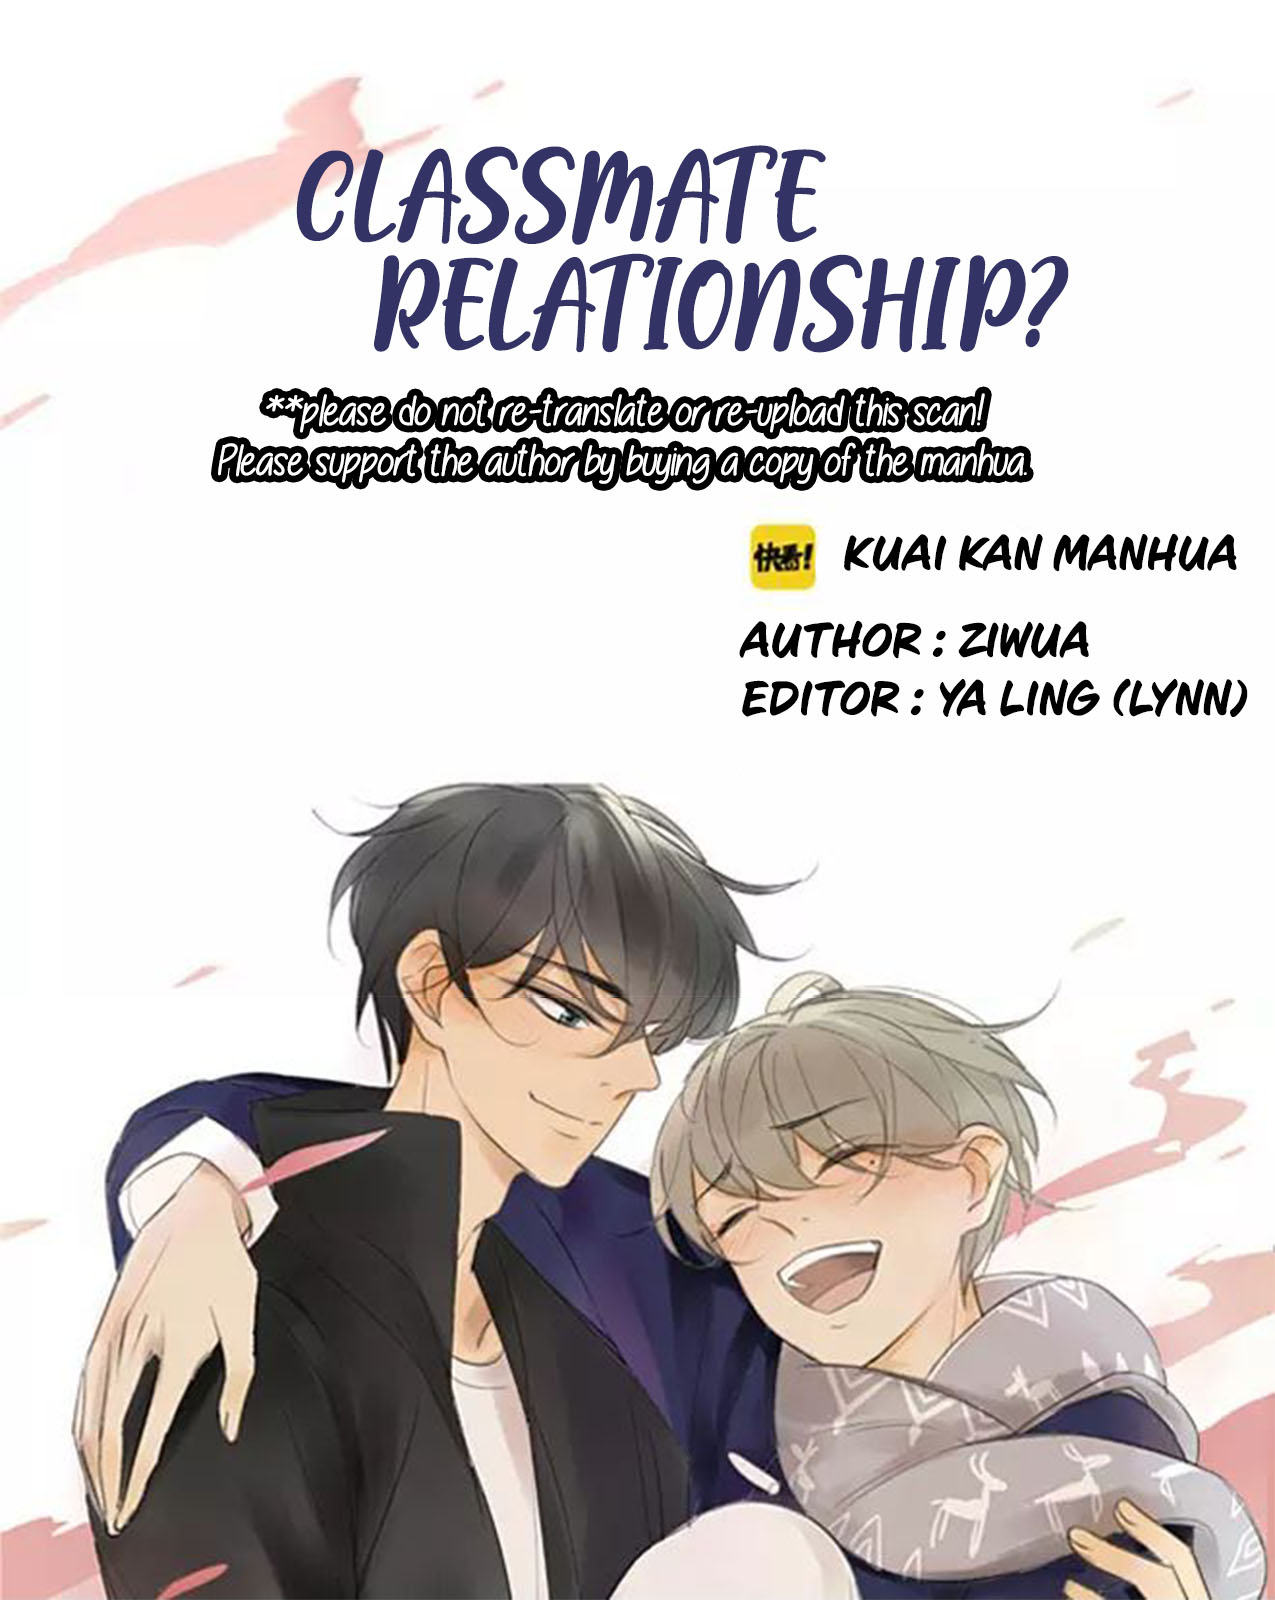 Classmate Relationship? Ch. 13 PART 1 I'LL CARRY YOU